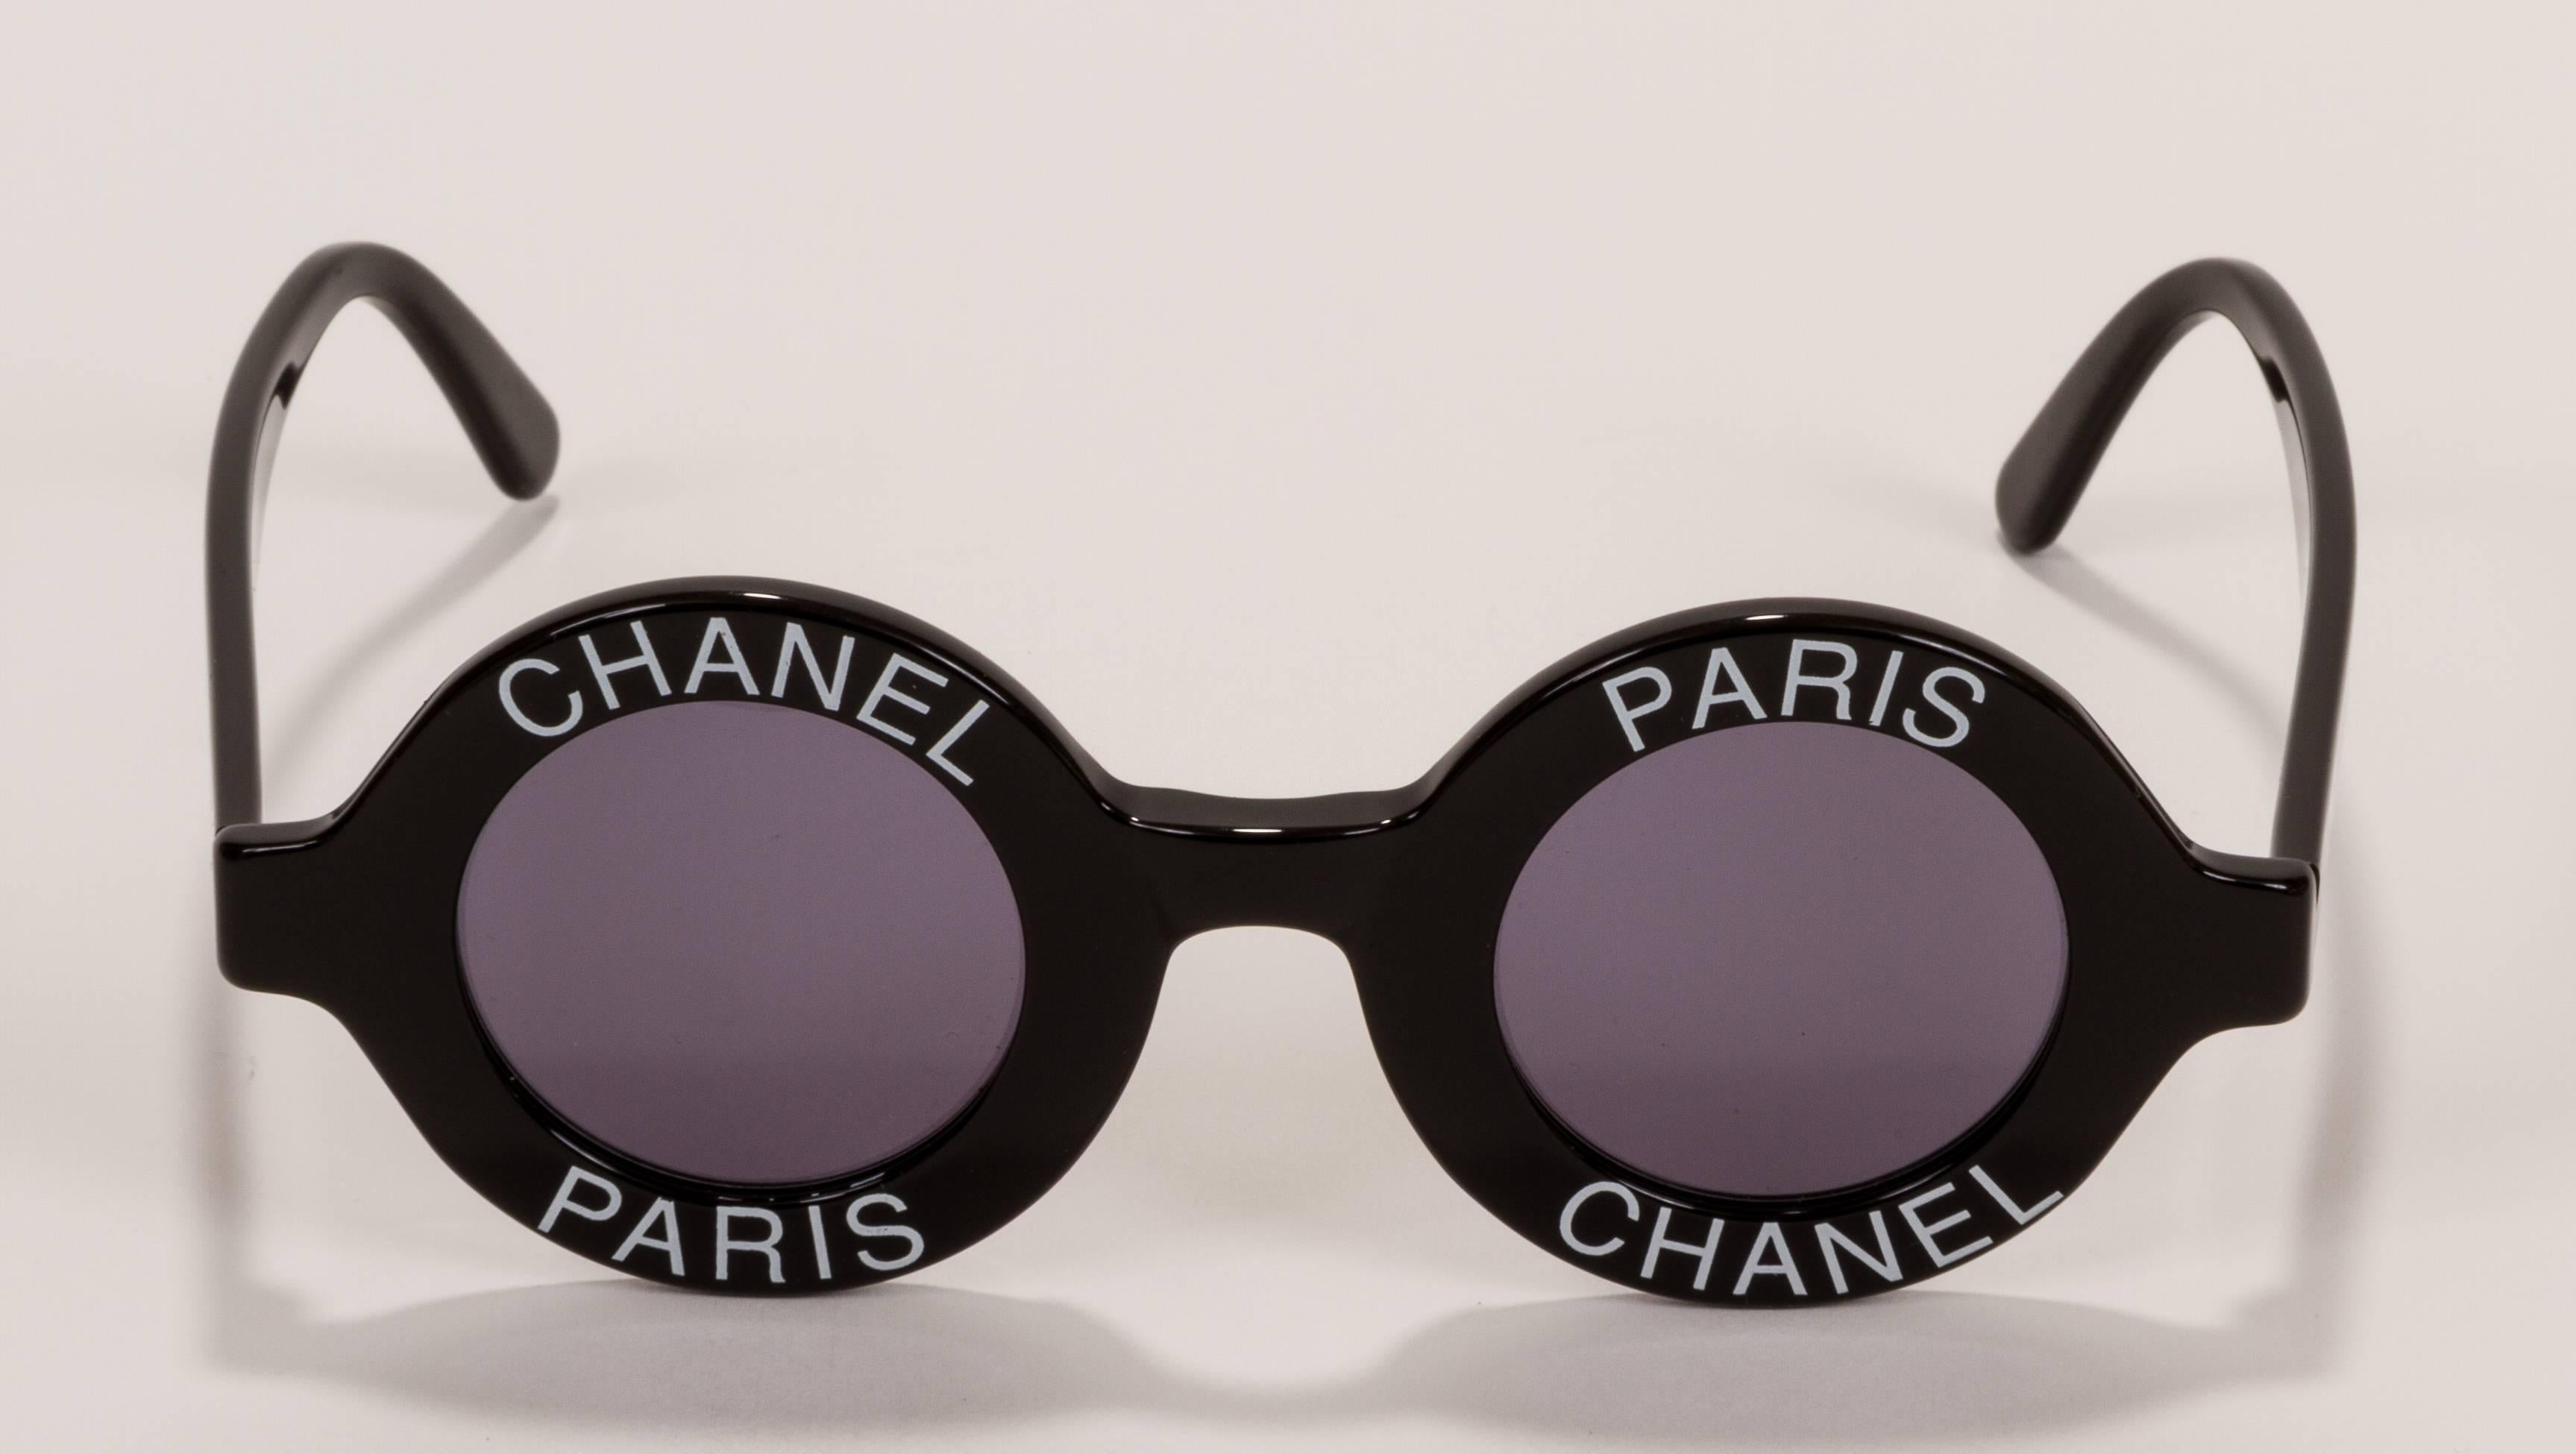 Late 1980s Chanel black and white round sunglasses. Comes with original Chanel box and cloth case. Minor scratches on frame and lenses.